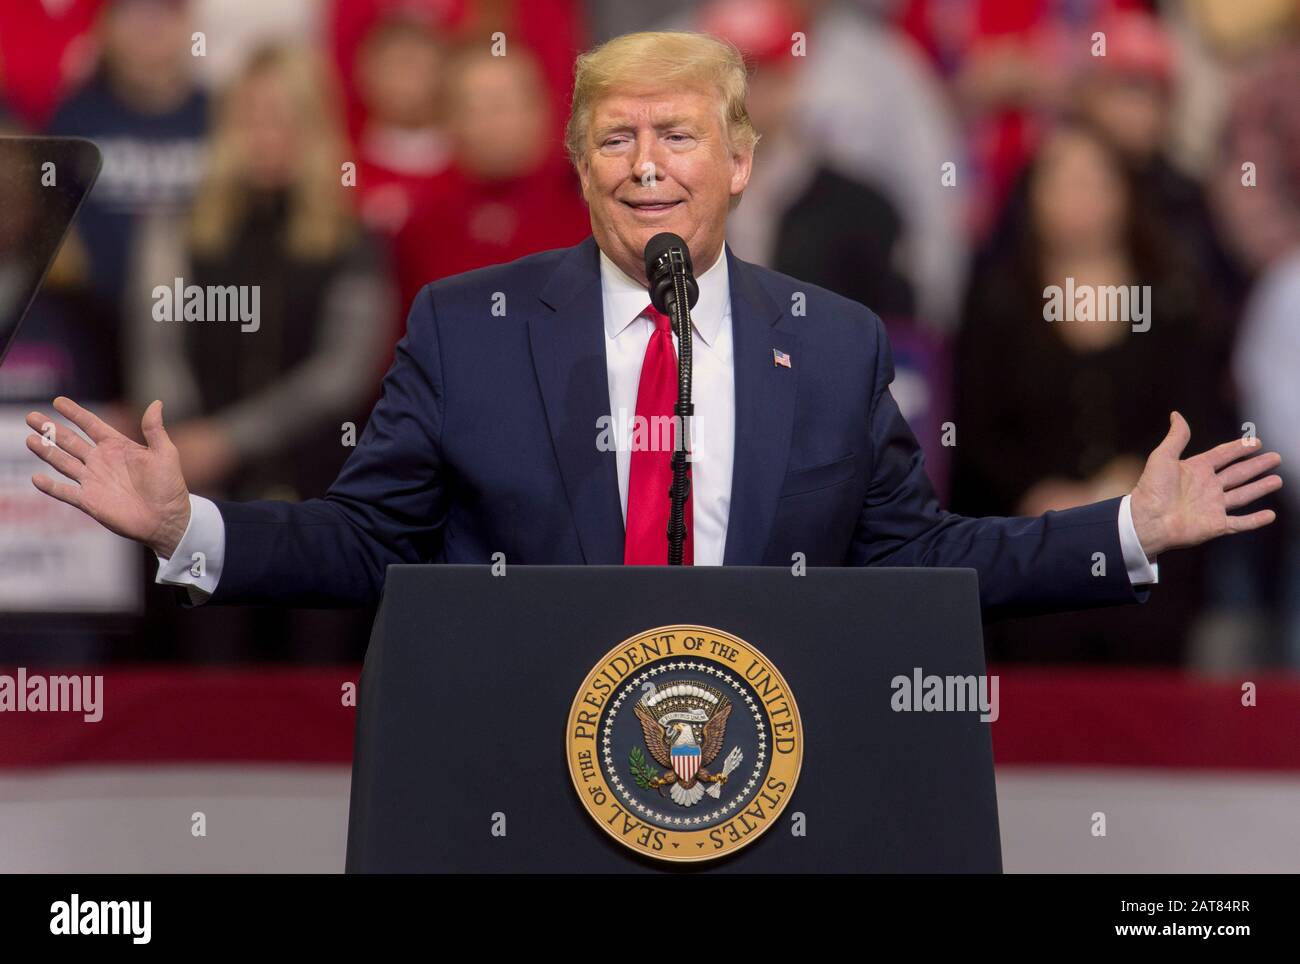 Jan.30, 2020 - Des Moines, Iowa, USA: President DONALD TRUMP holds a Keep America Great Rally at Drake University. The United State Senate is currently conducting an impeachment trial in Washington, D.C. which will determine whether Trump should be removed from office for abuse of power and obstruction of Congress. (Credit Image: © Brian Cahn/ZUMA Wire) Stock Photo